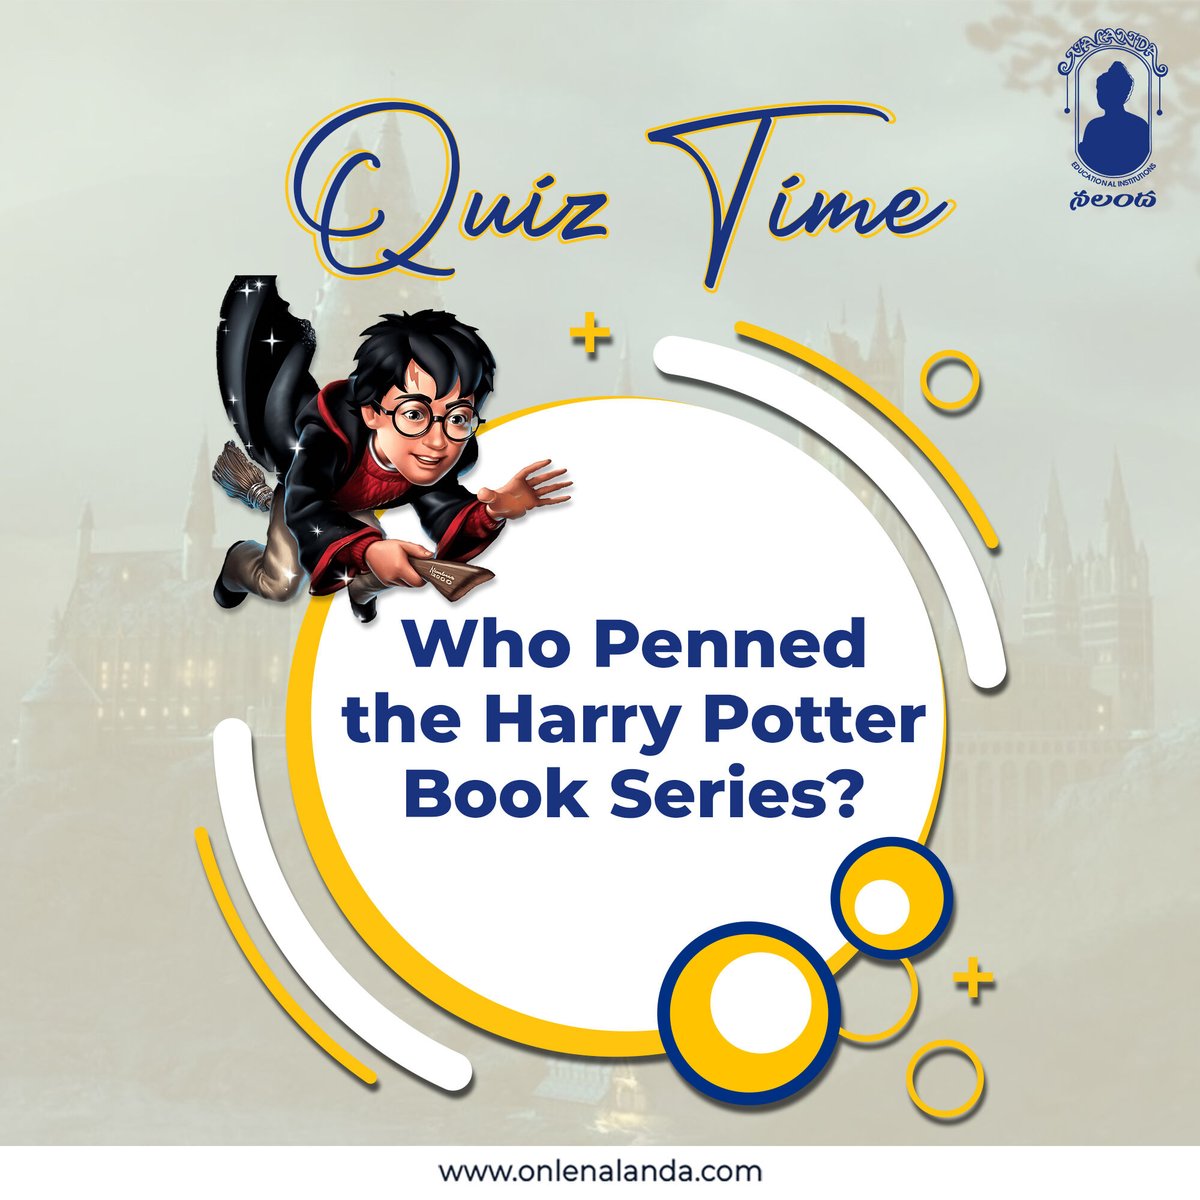 Guess who crafted the magical world we all wished to be part of? Drop your guess in the comments!

#onlenalanda #studentknowledge #schoolsinhyderabad  #trickyriddle #riddle #riddleoftheday #harrypotter #harrypotterseries #harrypotterlovers #harrypotterfans #harrypotterbooks #quiz